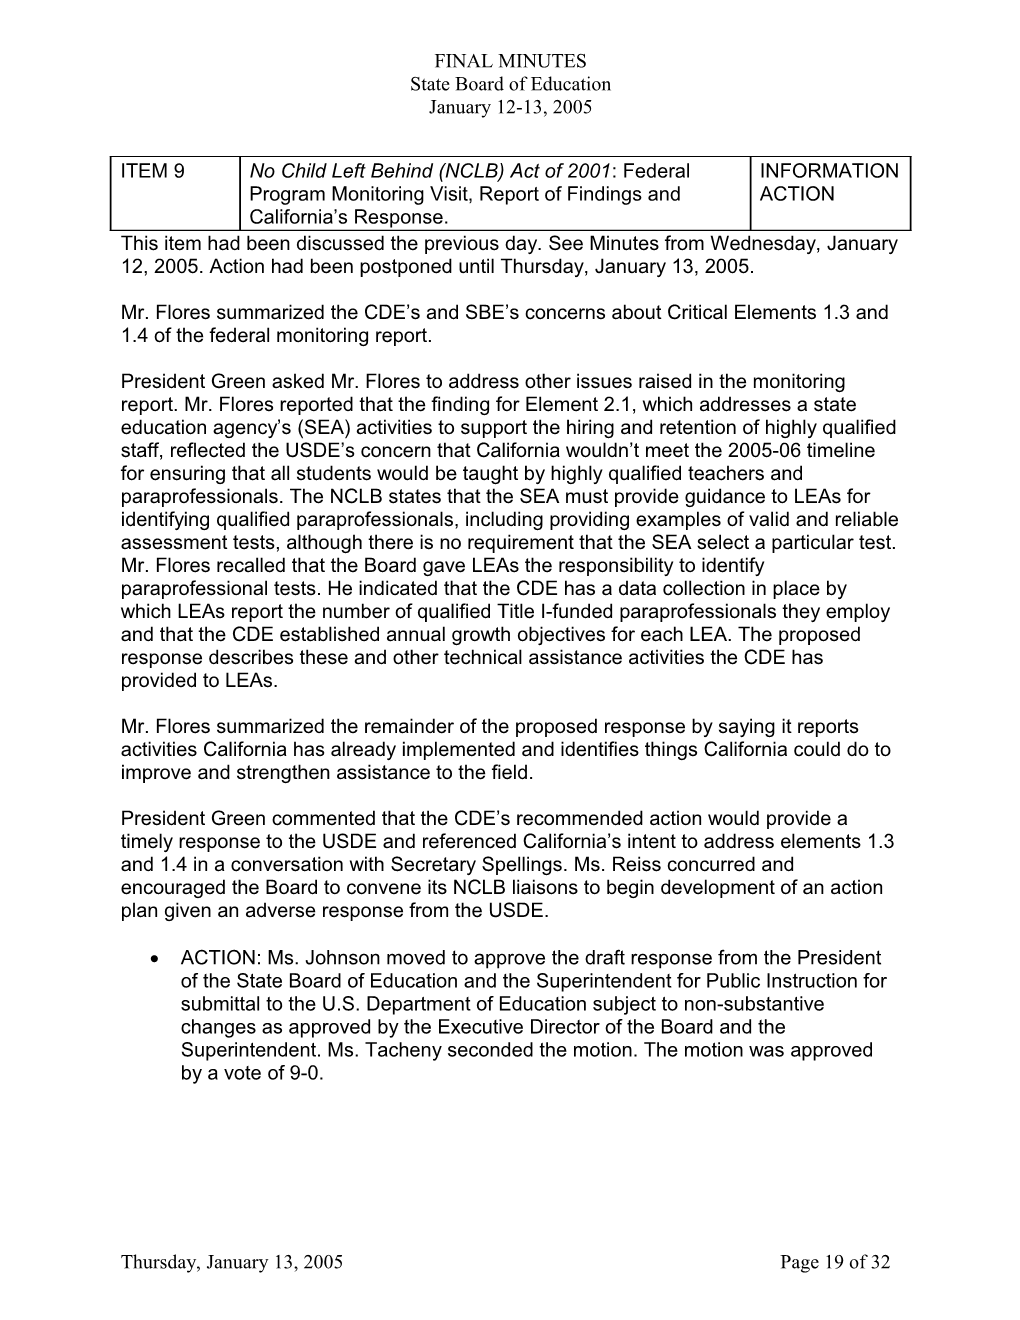 Final Minutes January 13, 2005 - SBE Minutes (CA State Board of Education)